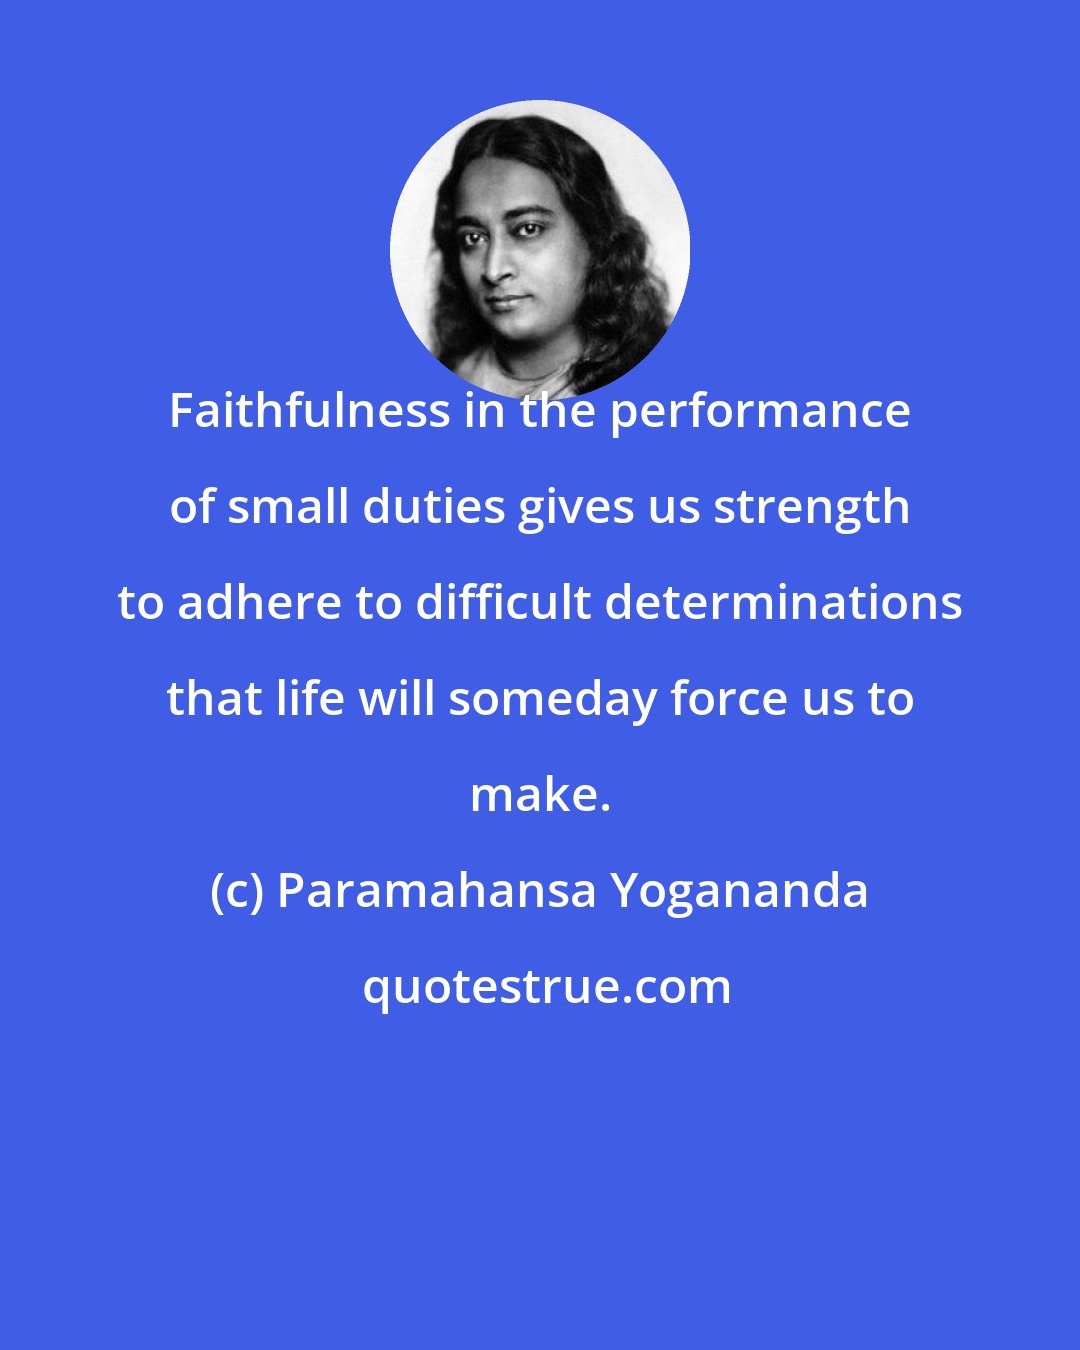 Paramahansa Yogananda: Faithfulness in the performance of small duties gives us strength to adhere to difficult determinations that life will someday force us to make.